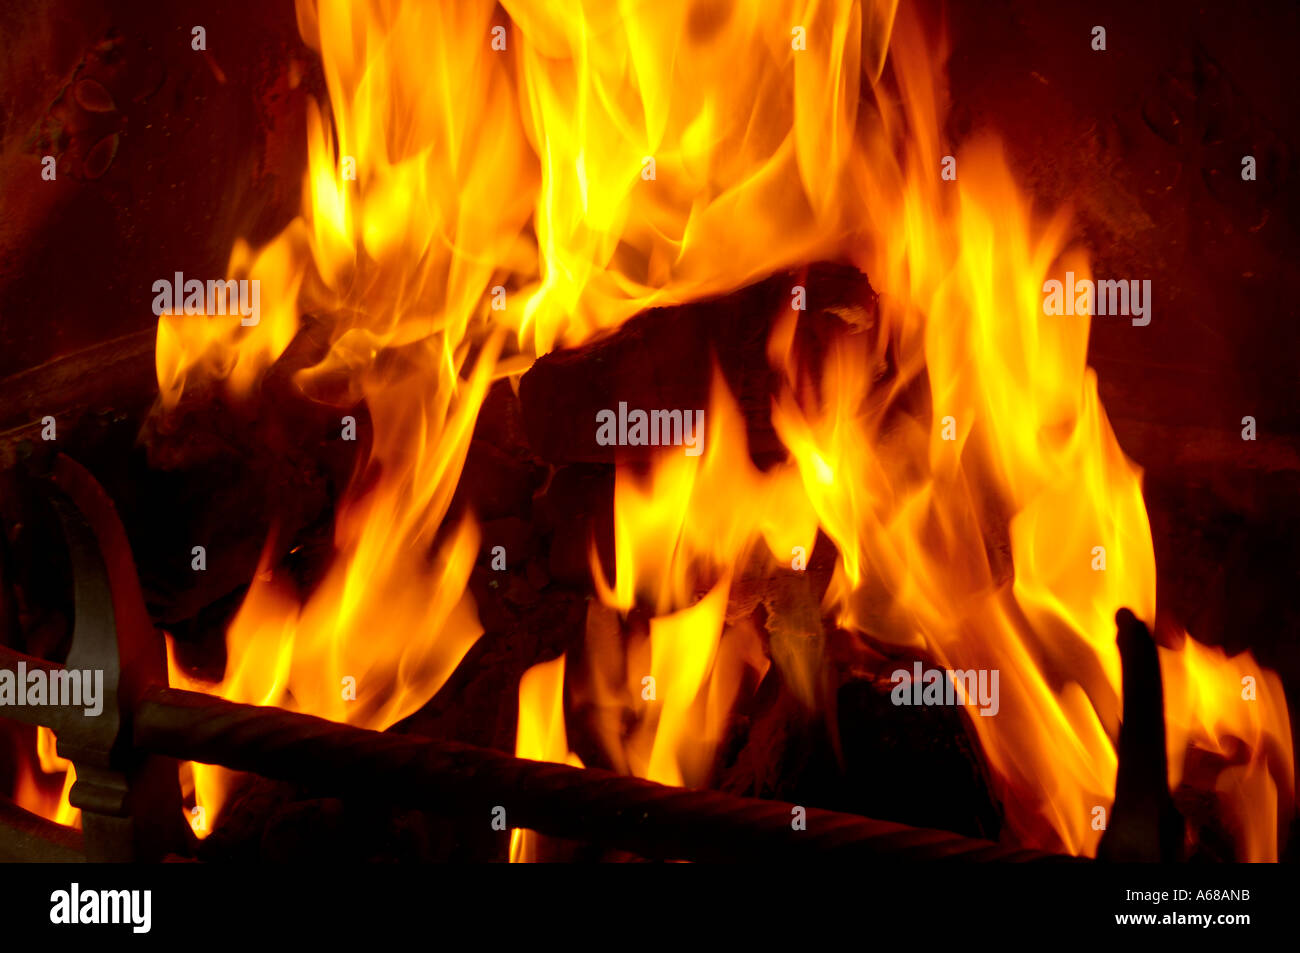 Fire in traditional grate Stock Photo